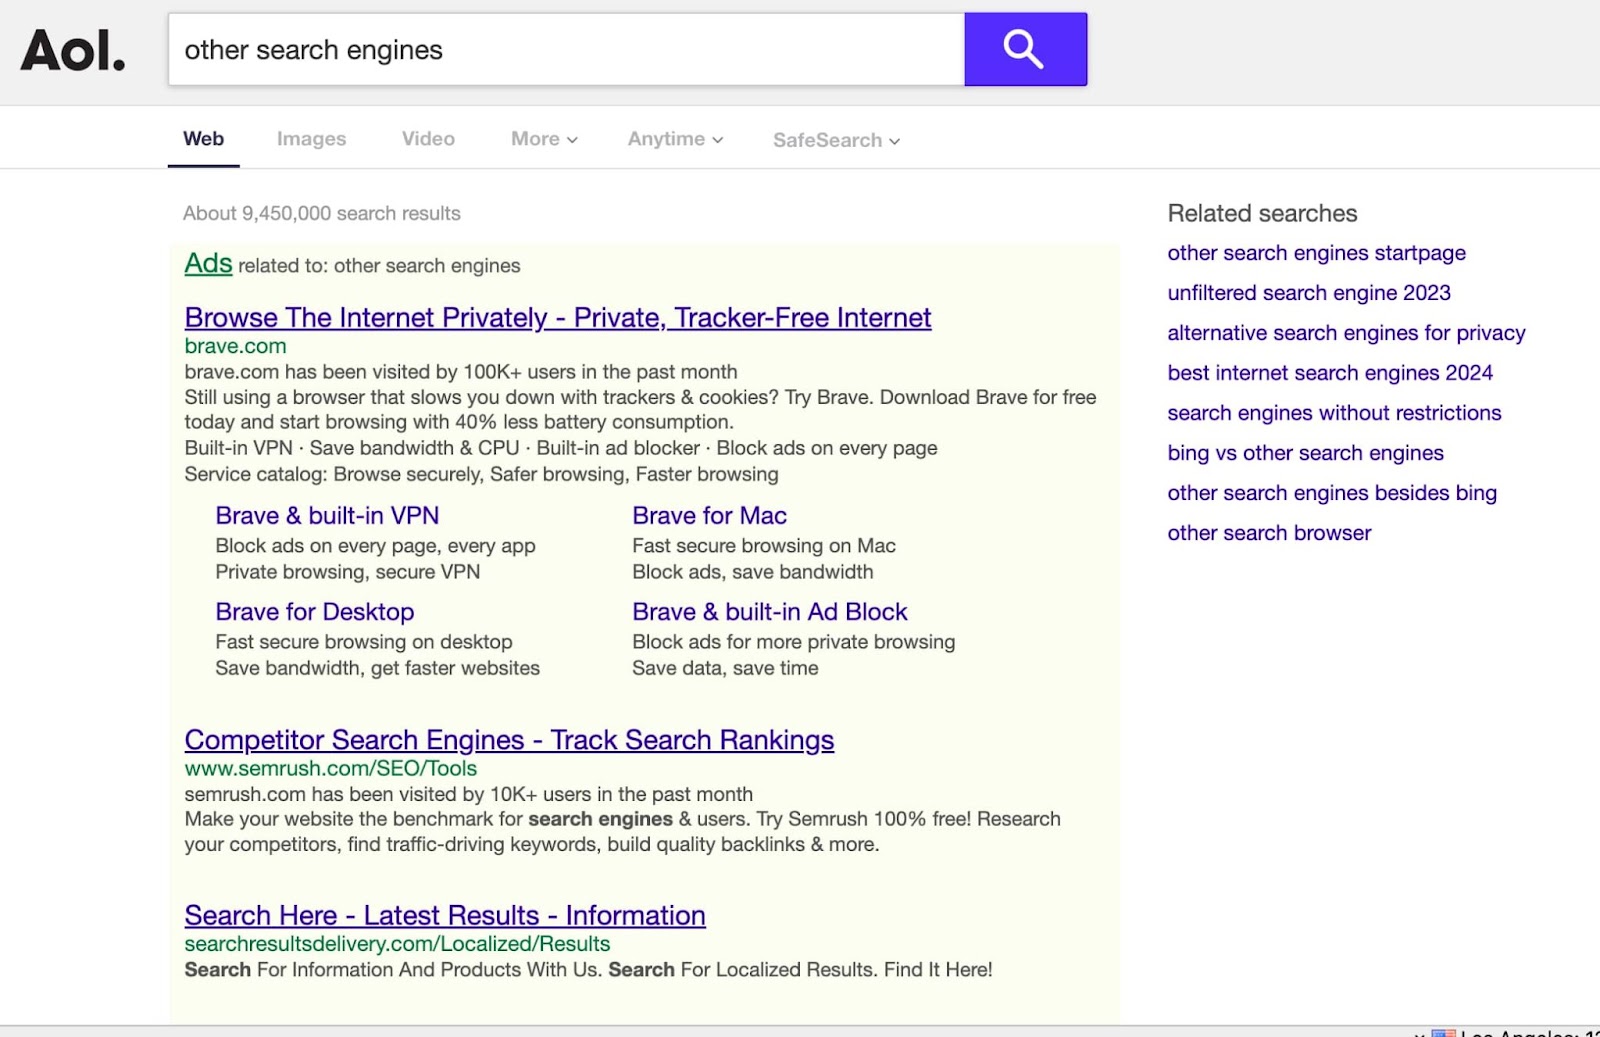 AOL search results page for “other search engines.”